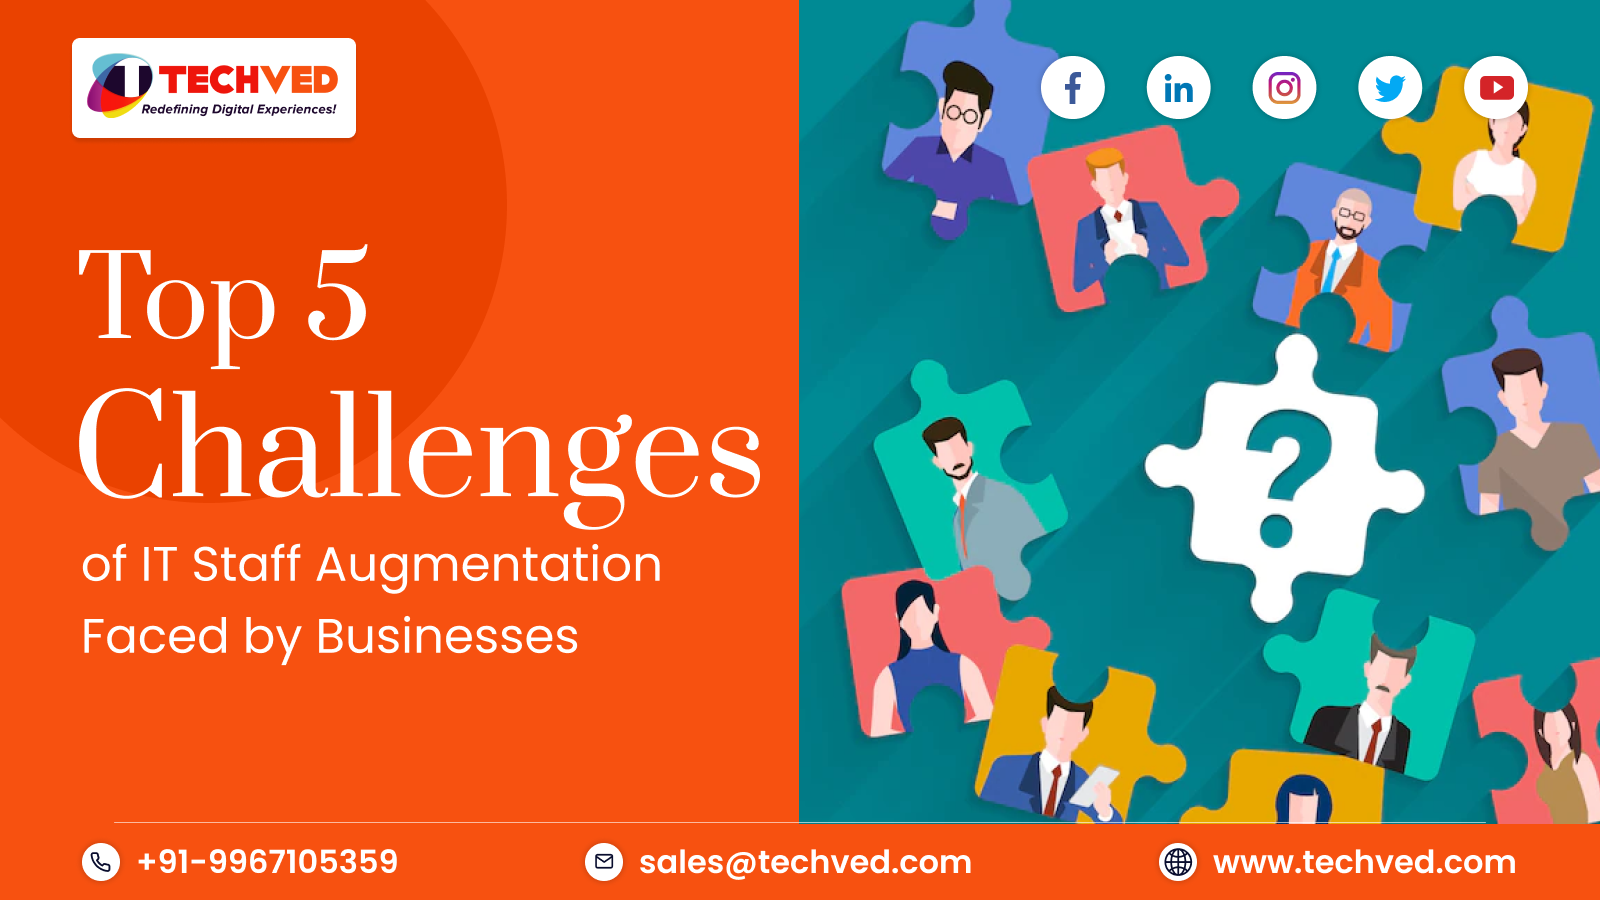 Top 5 Challenges of IT Staff Augmentation Faced by Businesses